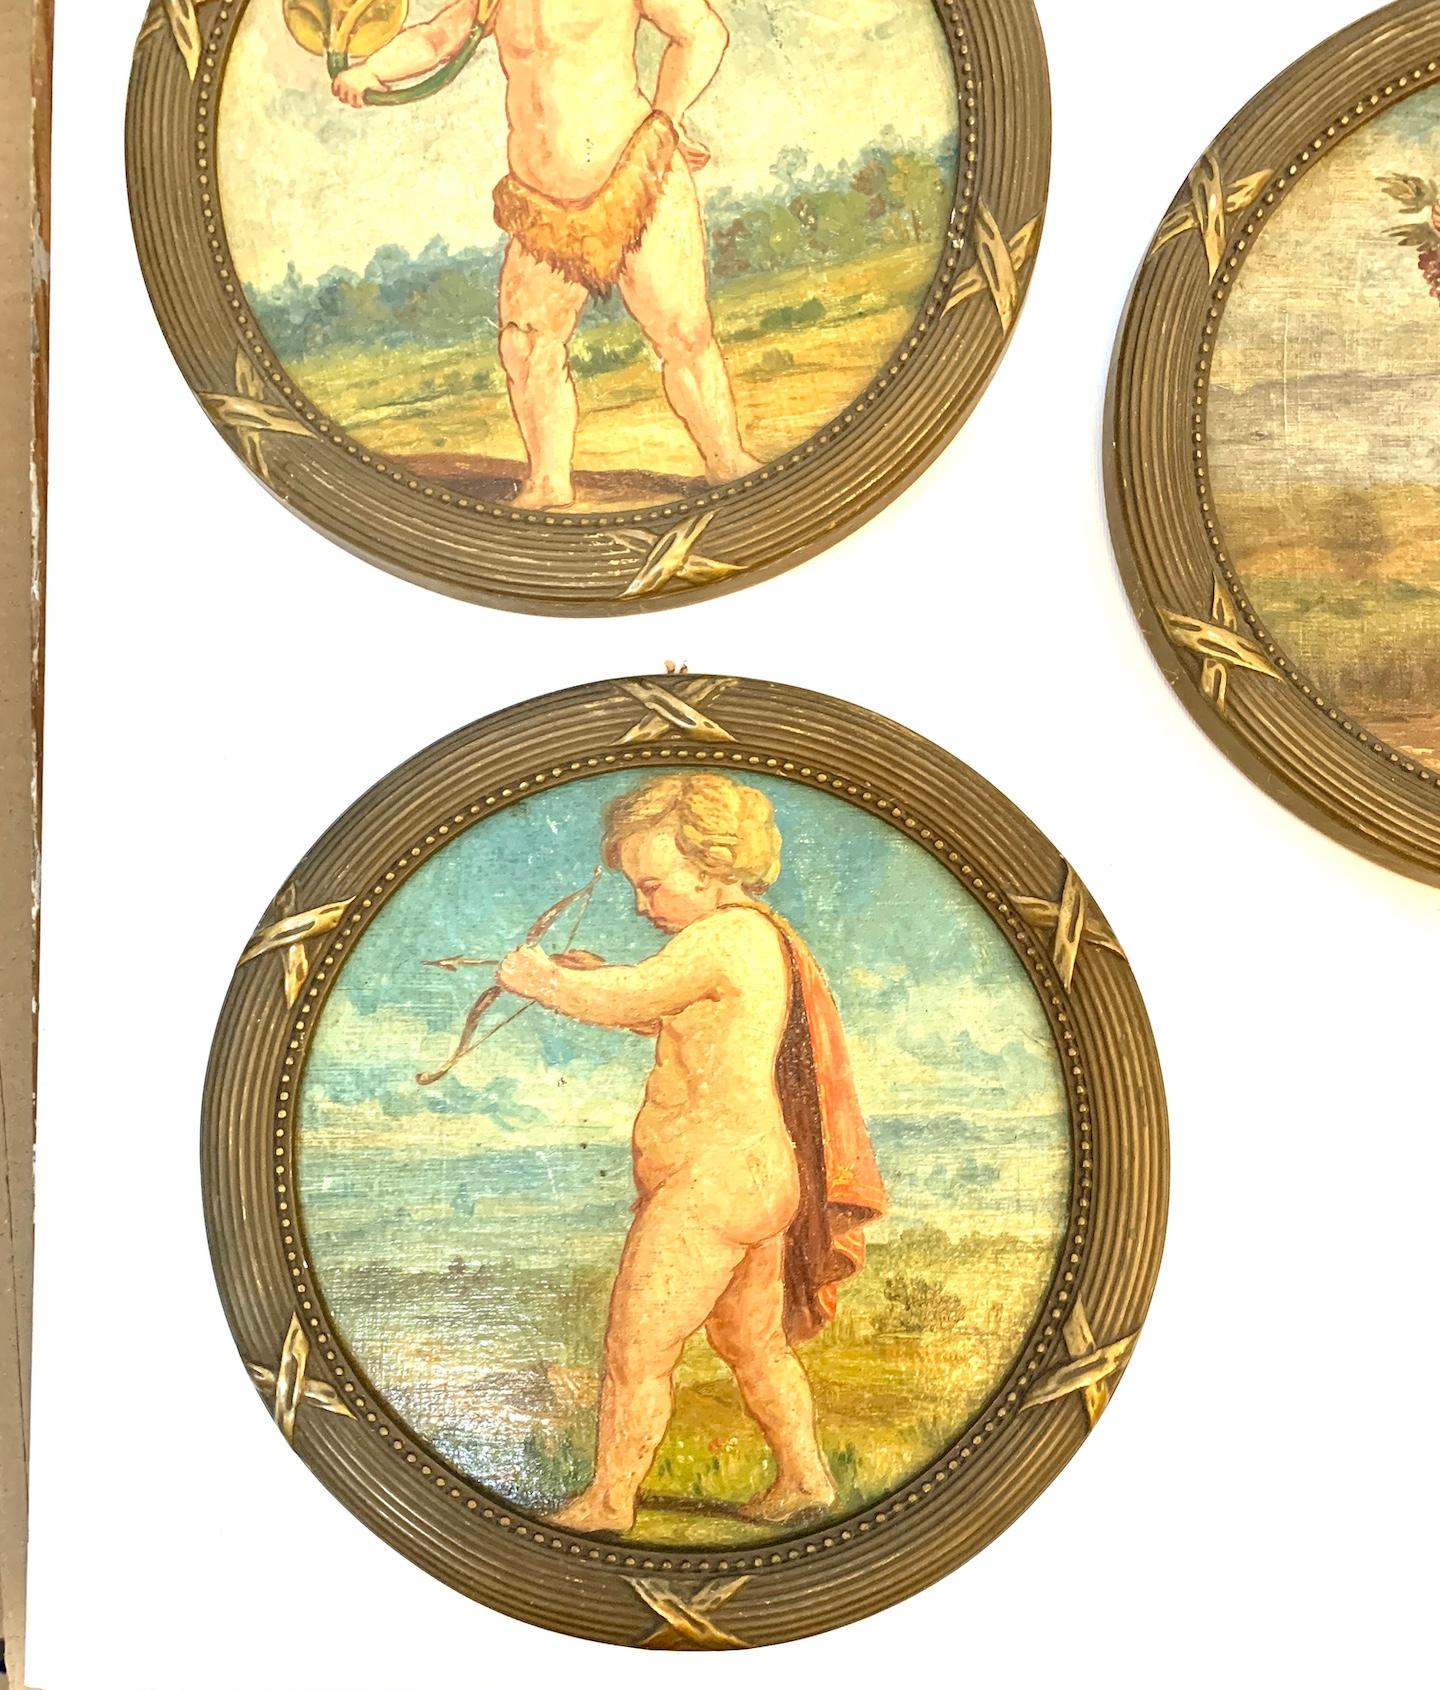 Set of Five late 19th century Italian or French portraits of Putti or Angels - Old Masters Painting by 19th century Italian School